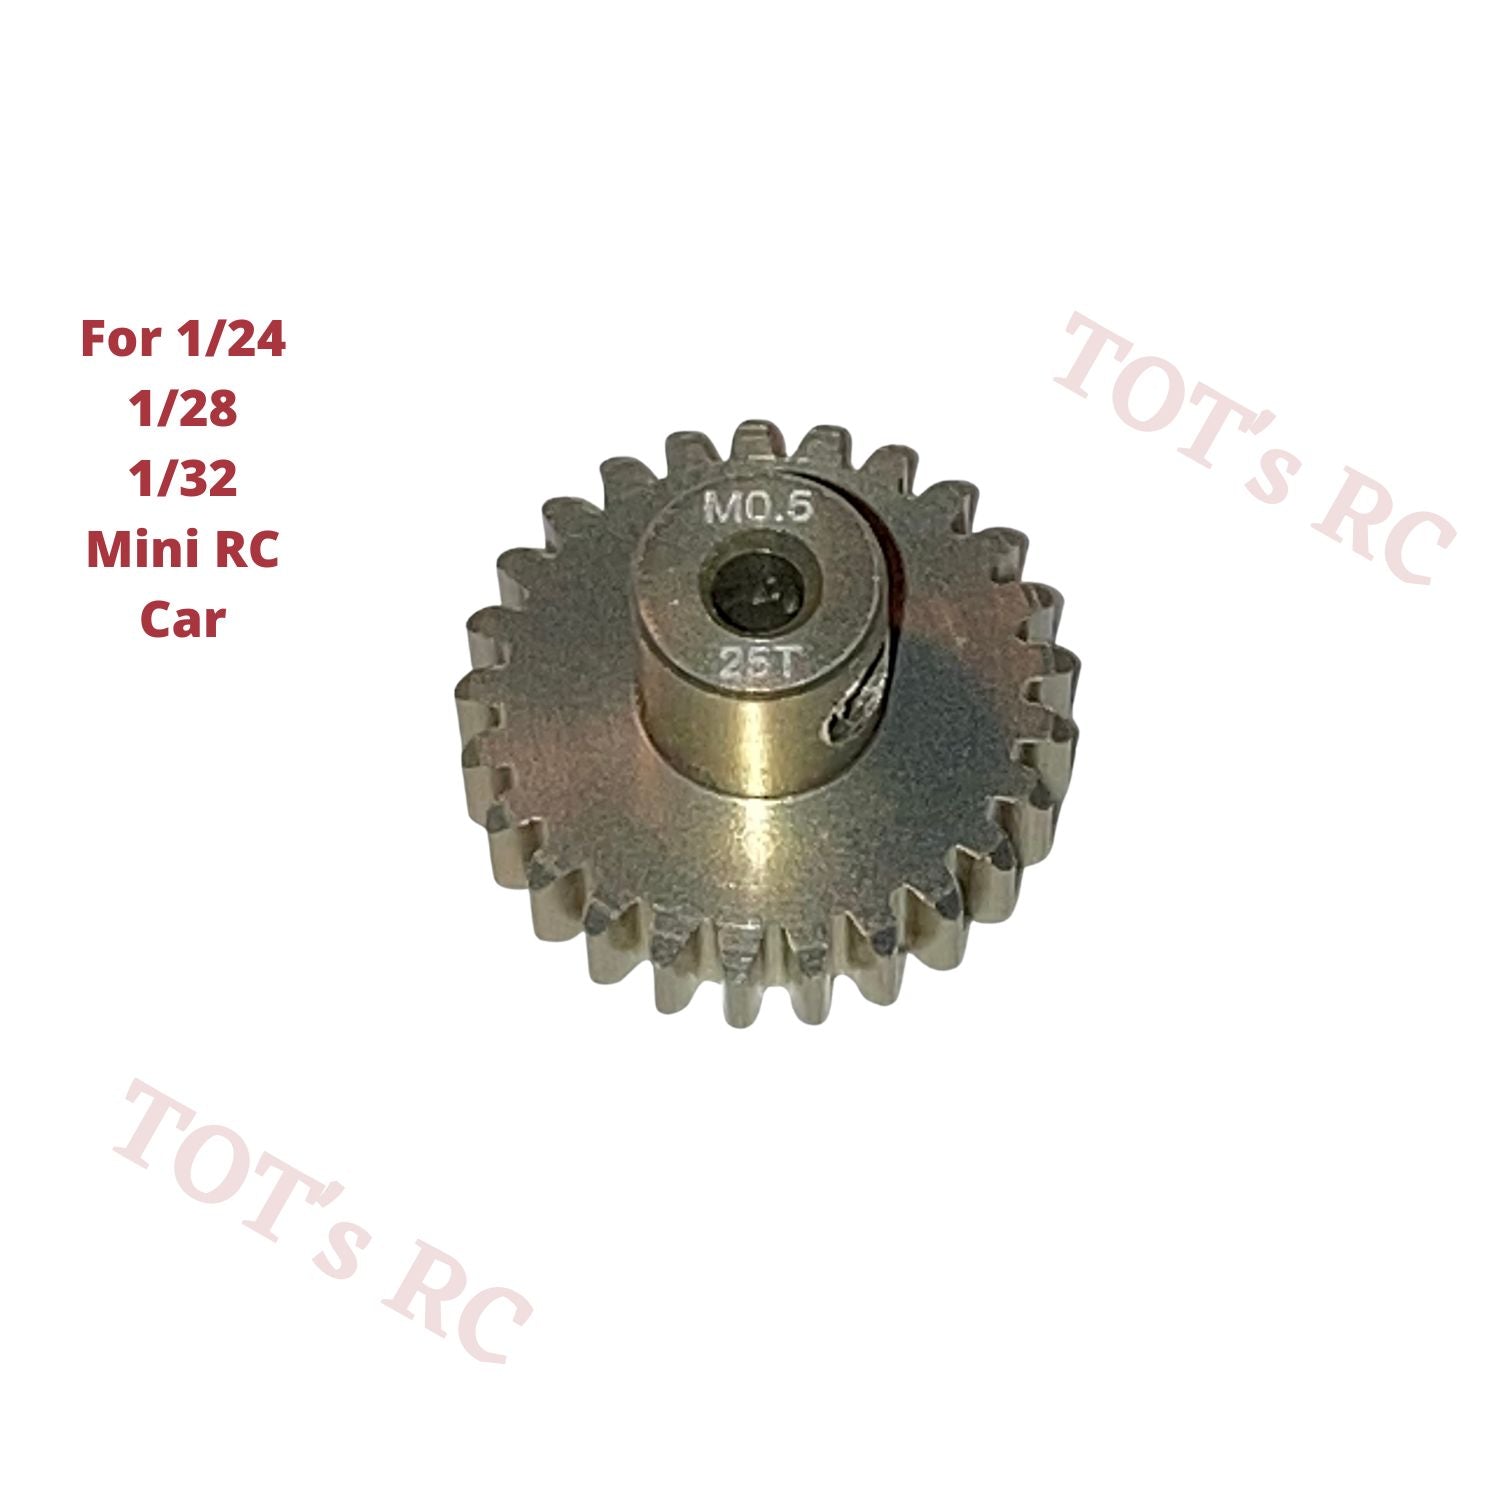 Surpass Hobby Rocket RC Pinion Gear M0.5 13T-25T 2.0MM Shaft For 1410 1525 motor